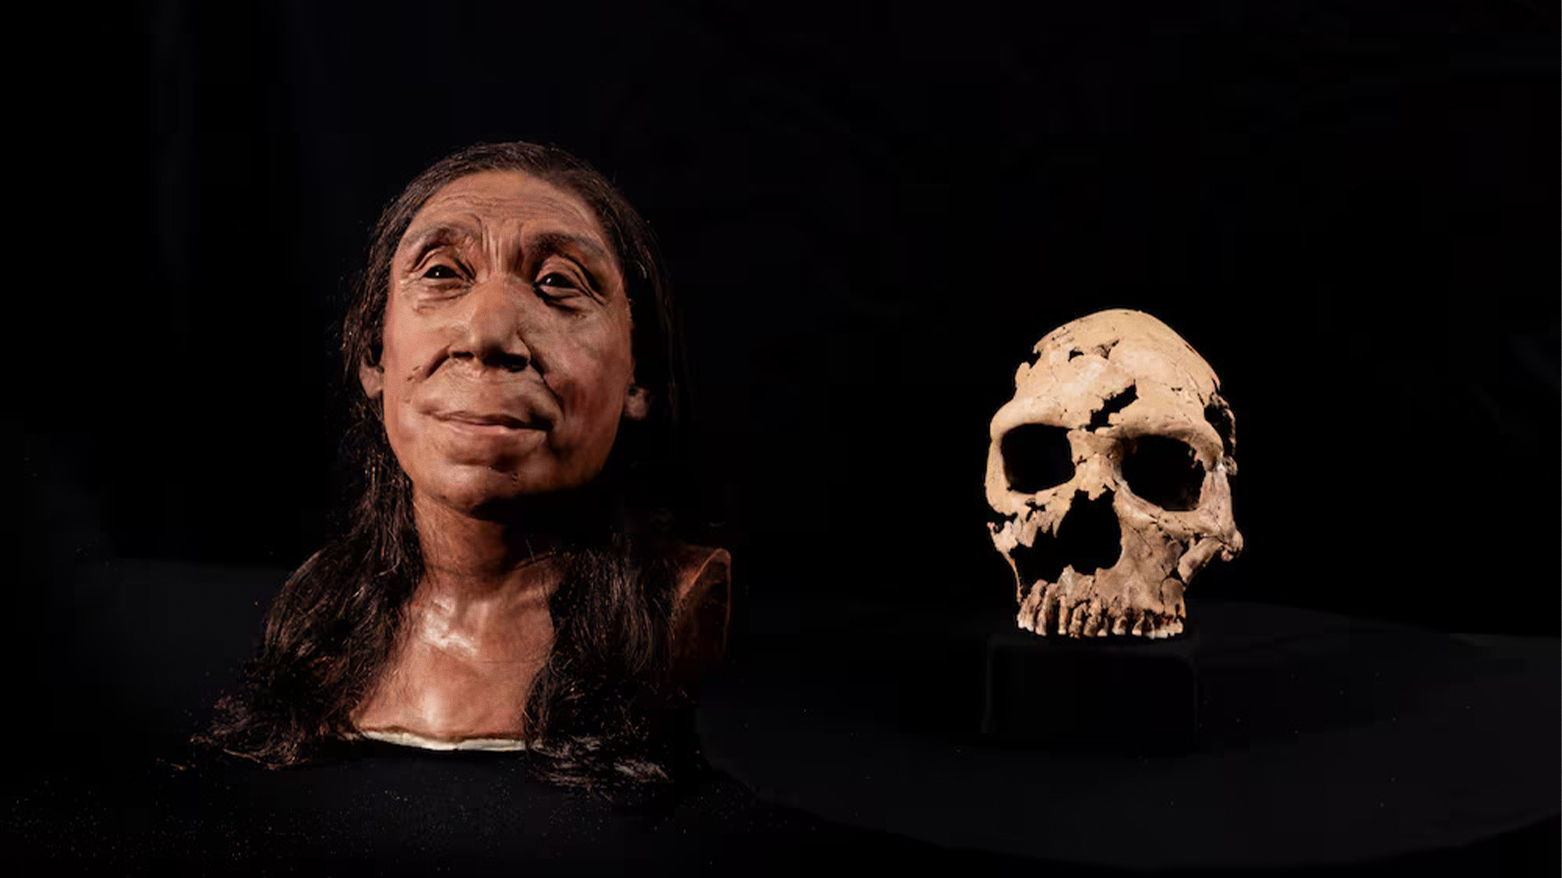 Reconstruction of Neanderthal woman Shanidar Z garners global attention